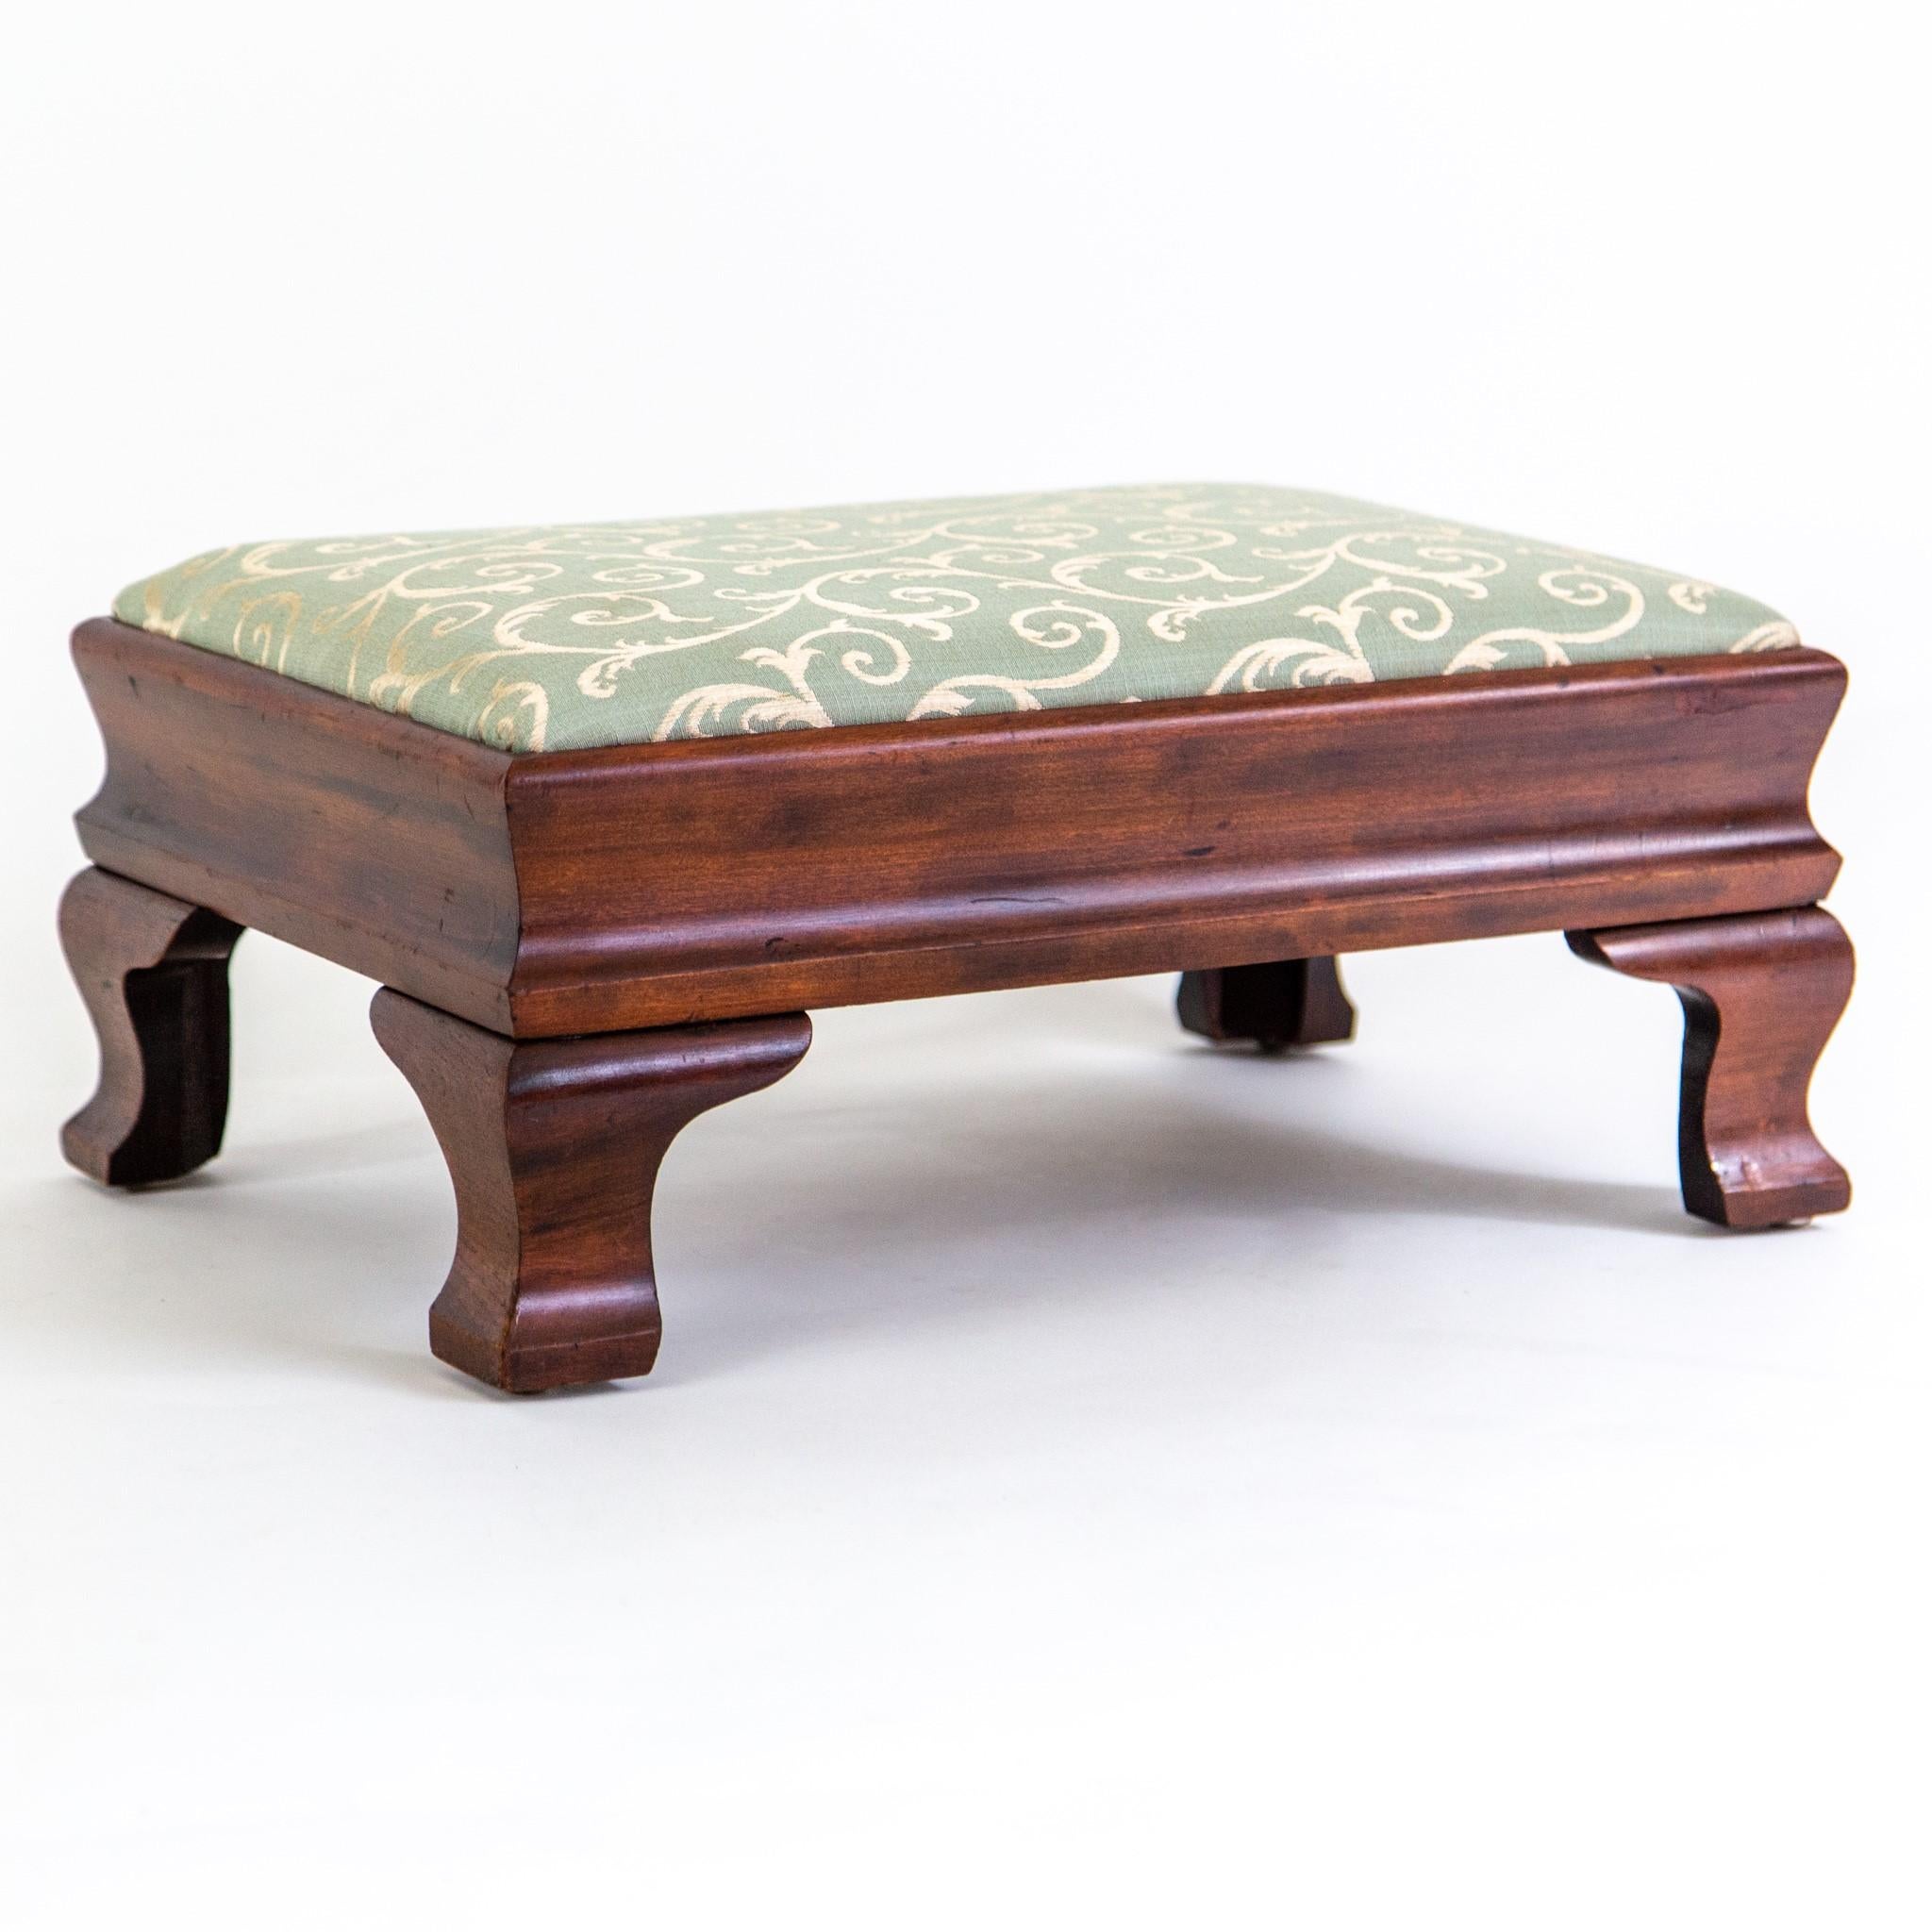 American Colonial Walnut Footstool with Bracket Feet and Green Upholstery